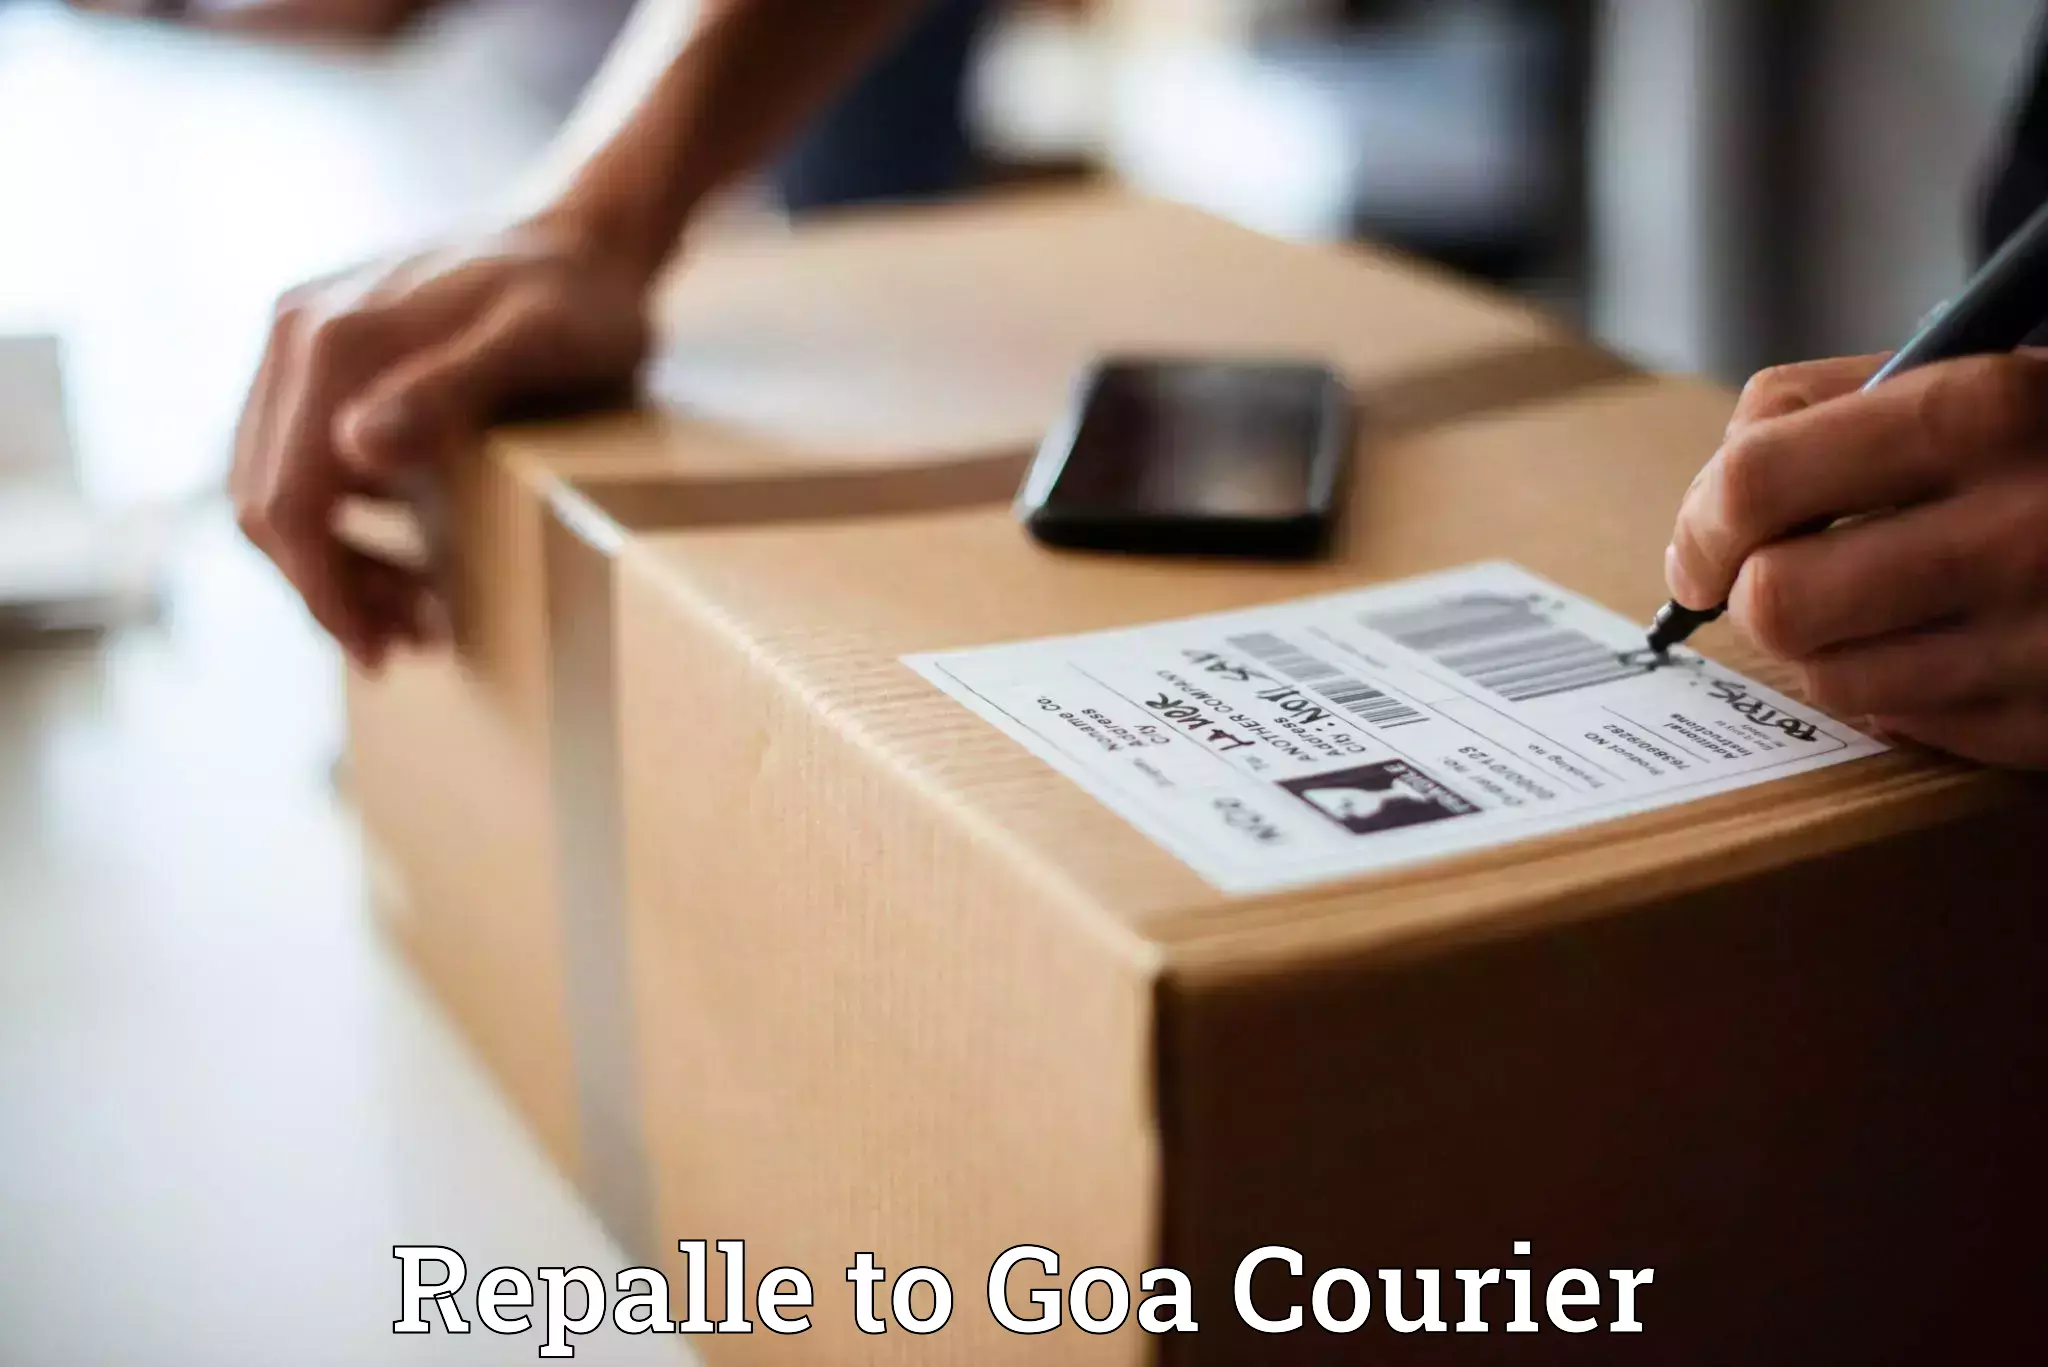 Global logistics network Repalle to South Goa